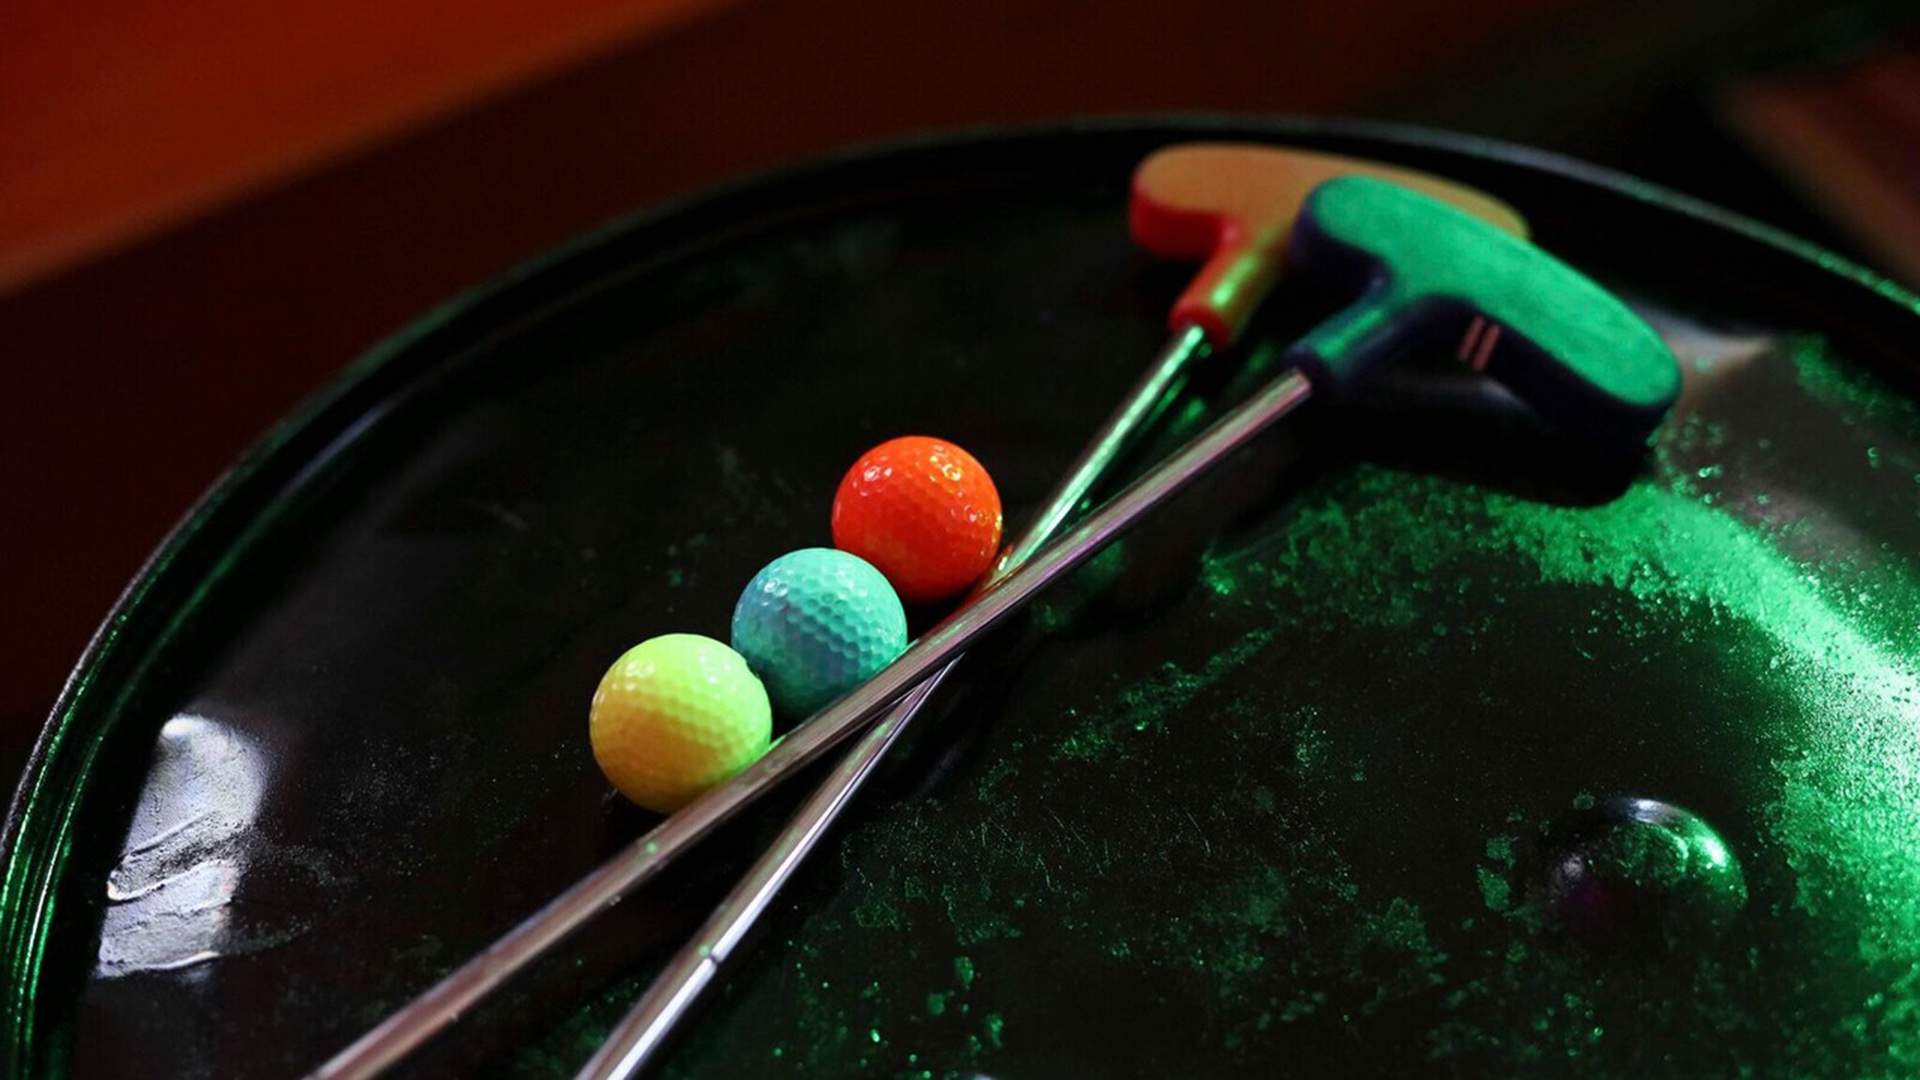 Southeast Queensland Is Now Home to Two More Holey Moley Mini-Golf Bars